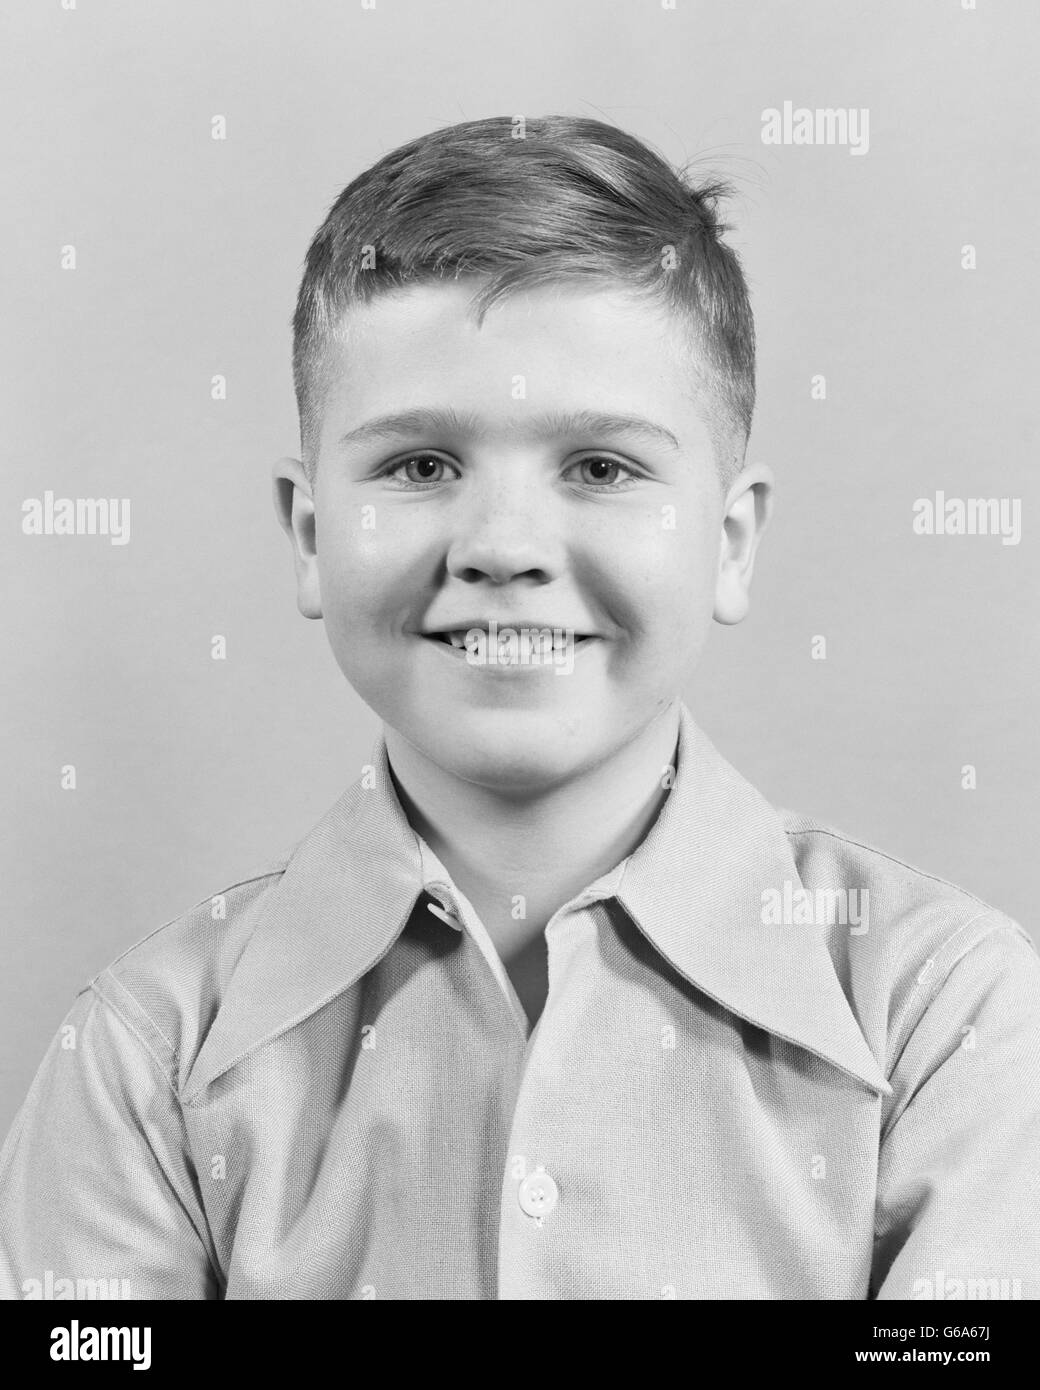 1950 SMILING BOY LOOKING AT CAMERA HEAD AND SHOULDERS PORTRAIT Banque D'Images